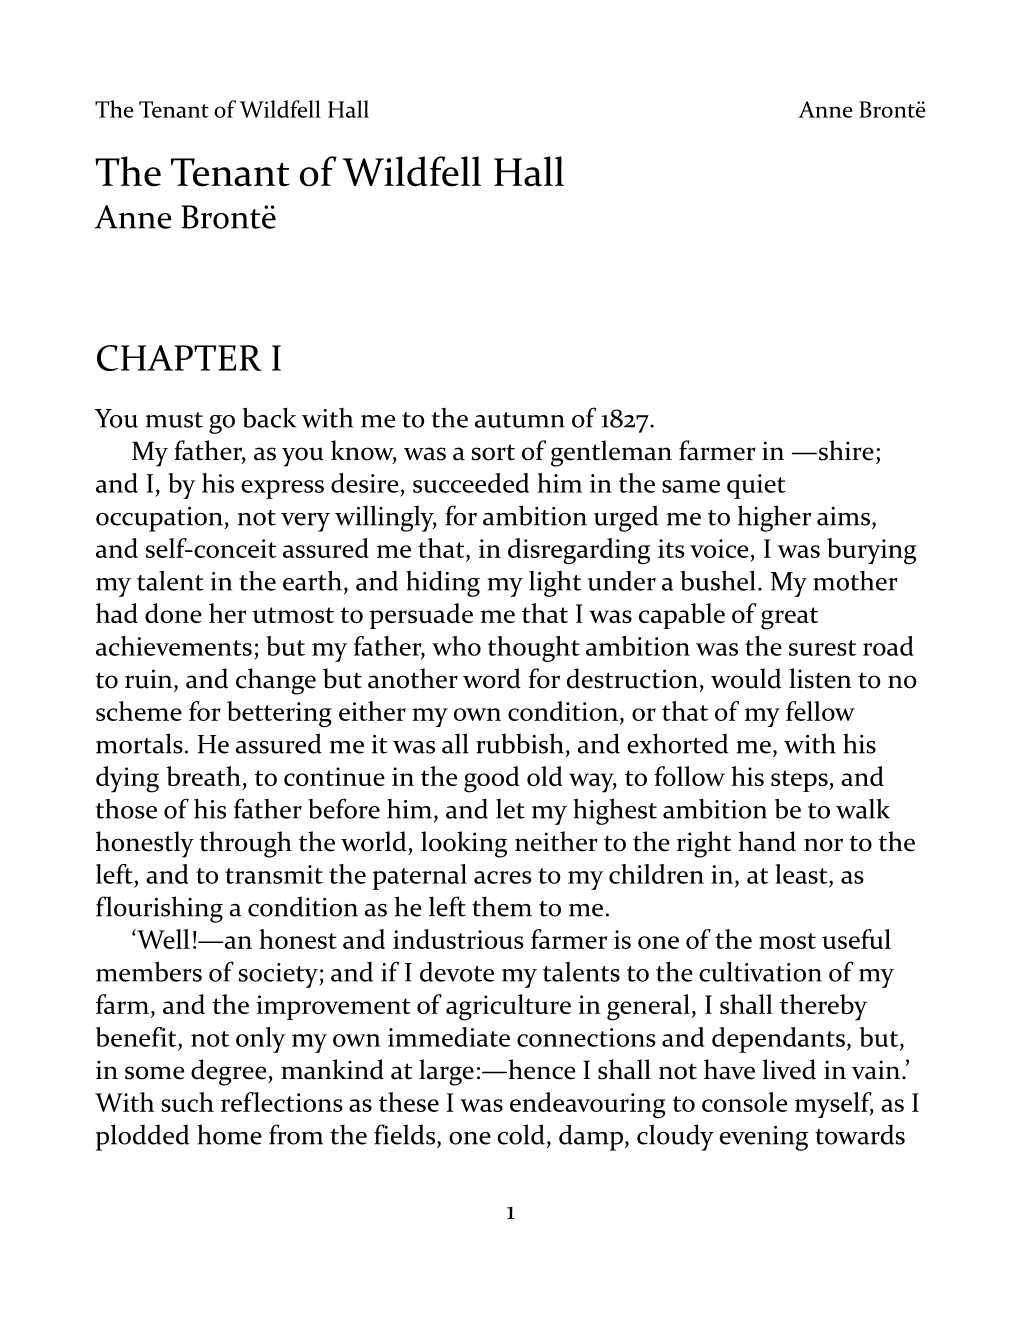 The Tenant of Wildfell Hall Anne Brontë the Tenant of Wildfell Hall Anne Brontë